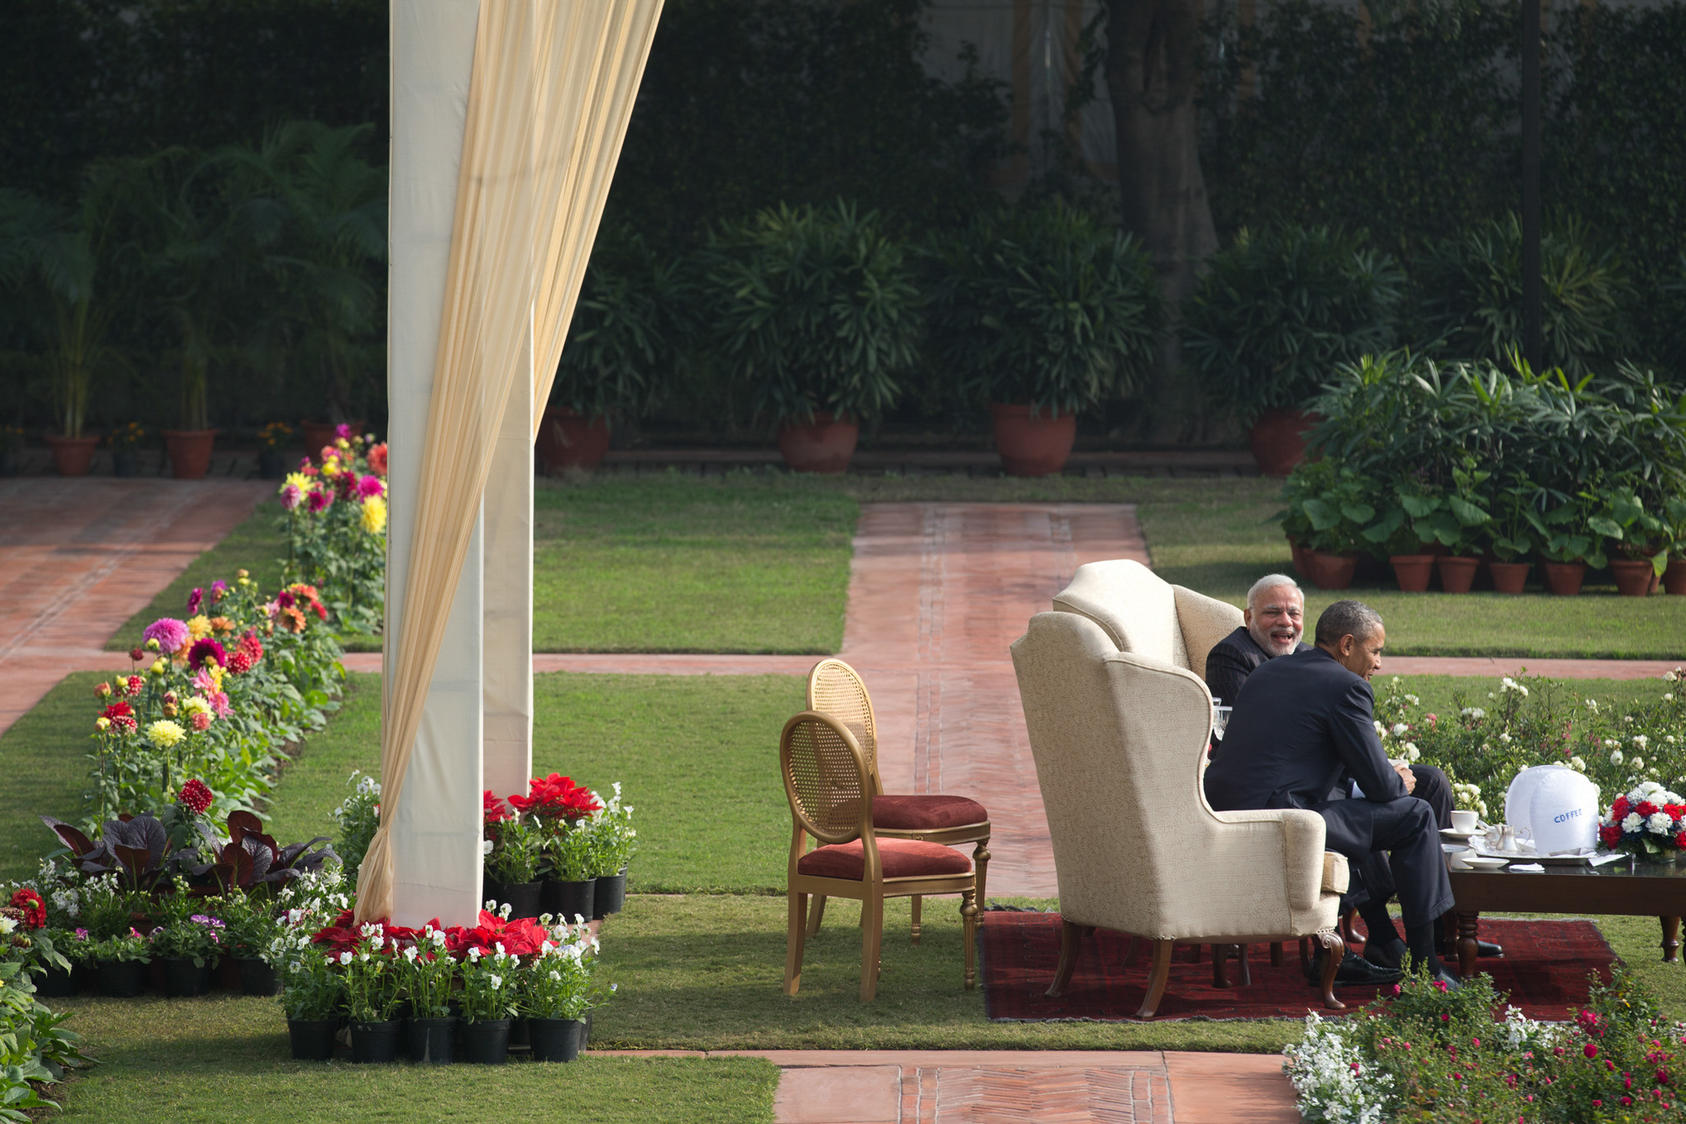 President Barack Obama and Prime Minister Narendra Modi have tea at Hyderabad House in New Delhi, Jan. 25, 2015. Obama swept aside past friction with India on Sunday to report progress on climate change and civilian nuclear power cooperation as he sought to transform a fraught relationship marked by suspicion into an enduring partnership linking the world’s oldest and largest democracies. (Stephen Crowley/The New York Times)